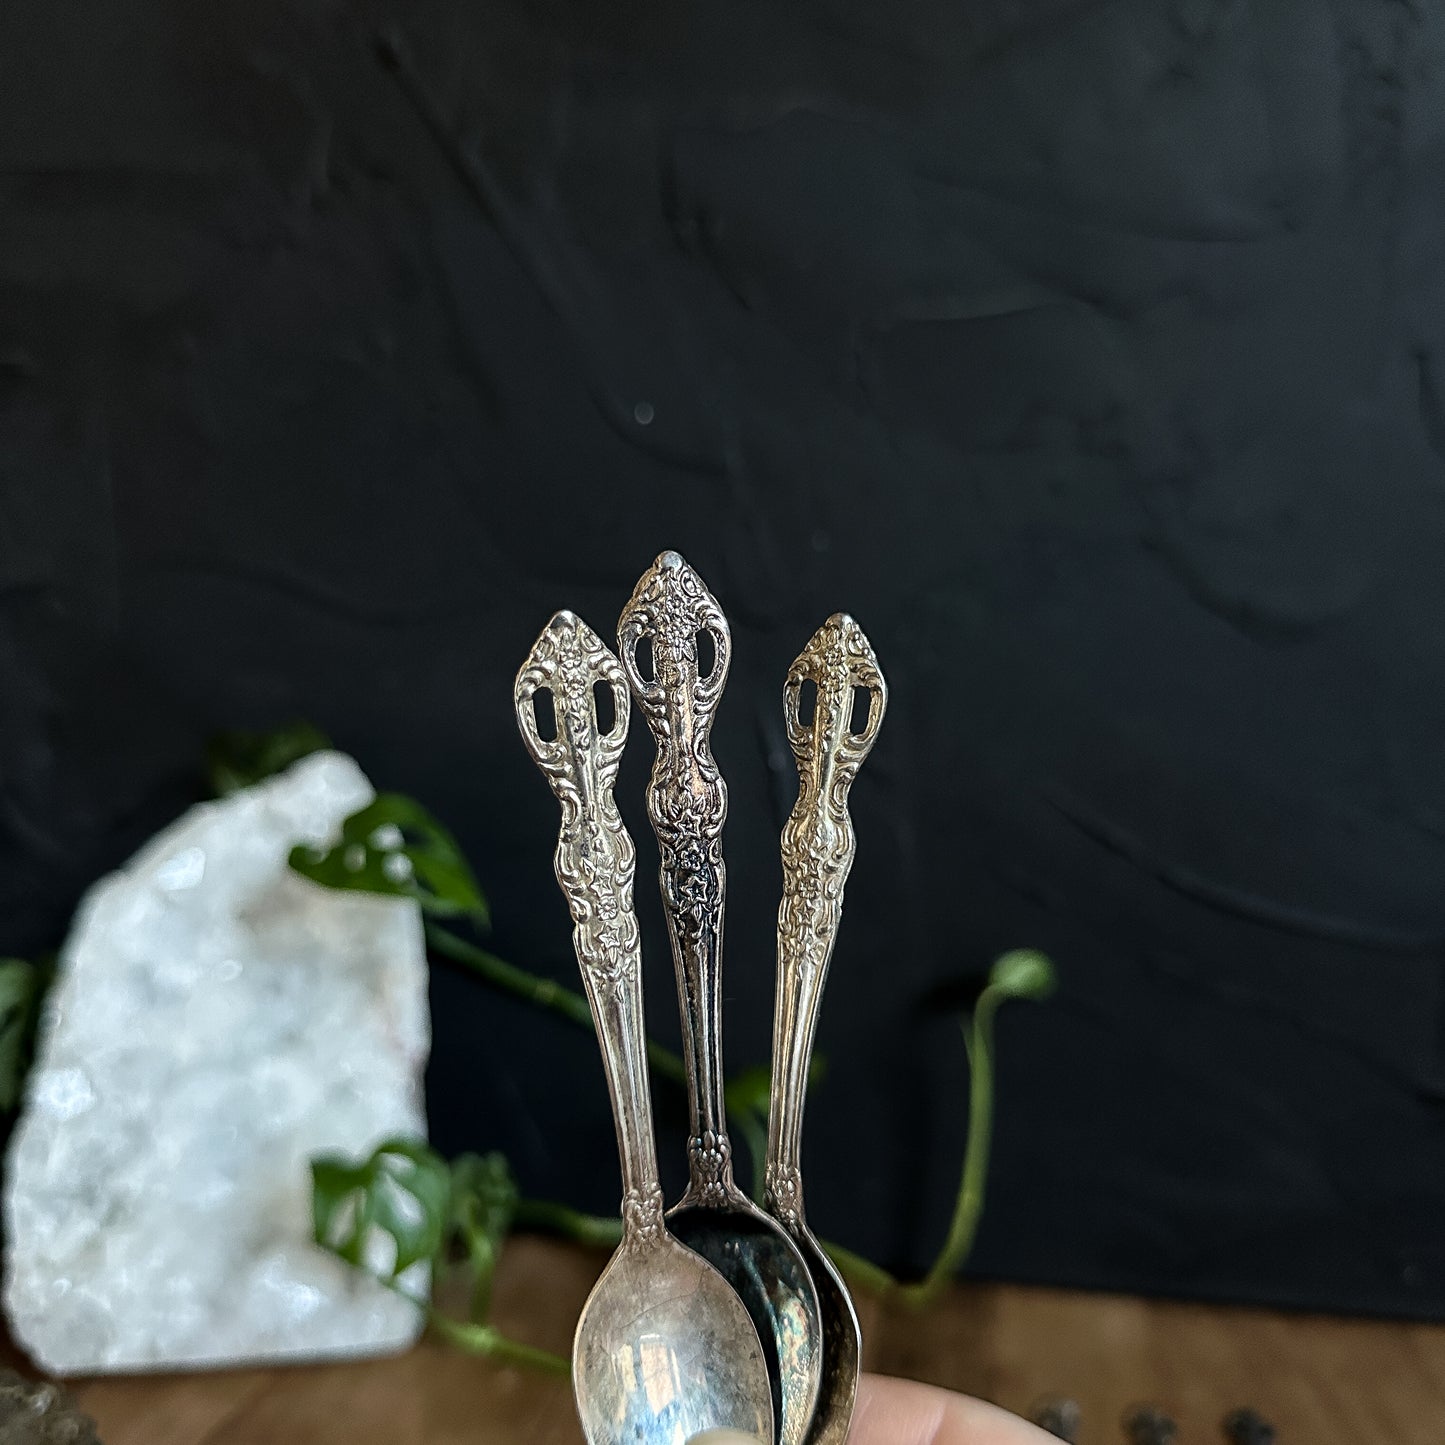 Vintage Altar Spoons with  Floral cutout Designs 